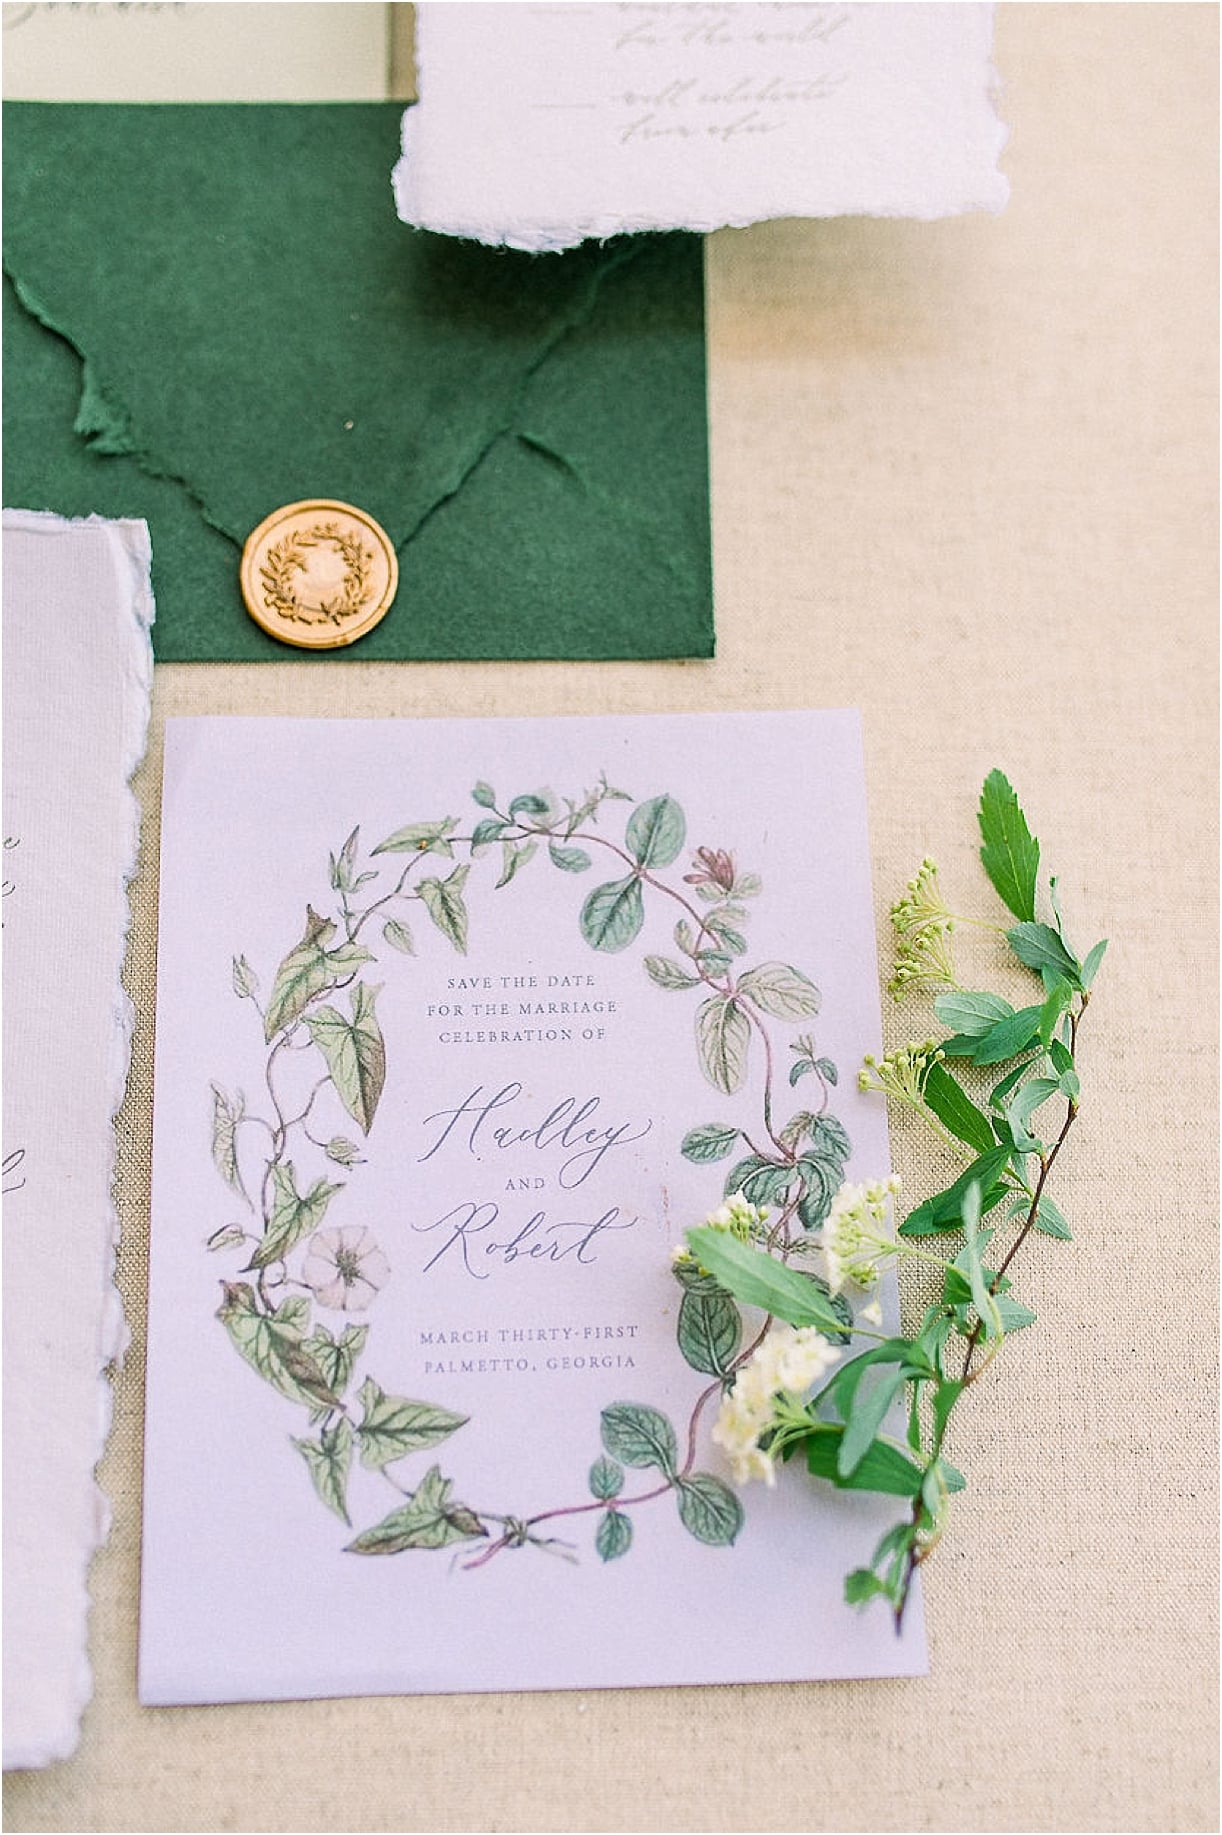 Autumnal Styled Shoot with Unique Spring Wedding Colors | Hill City Bride Virginia Wedding Blog Wedding Invitation Green